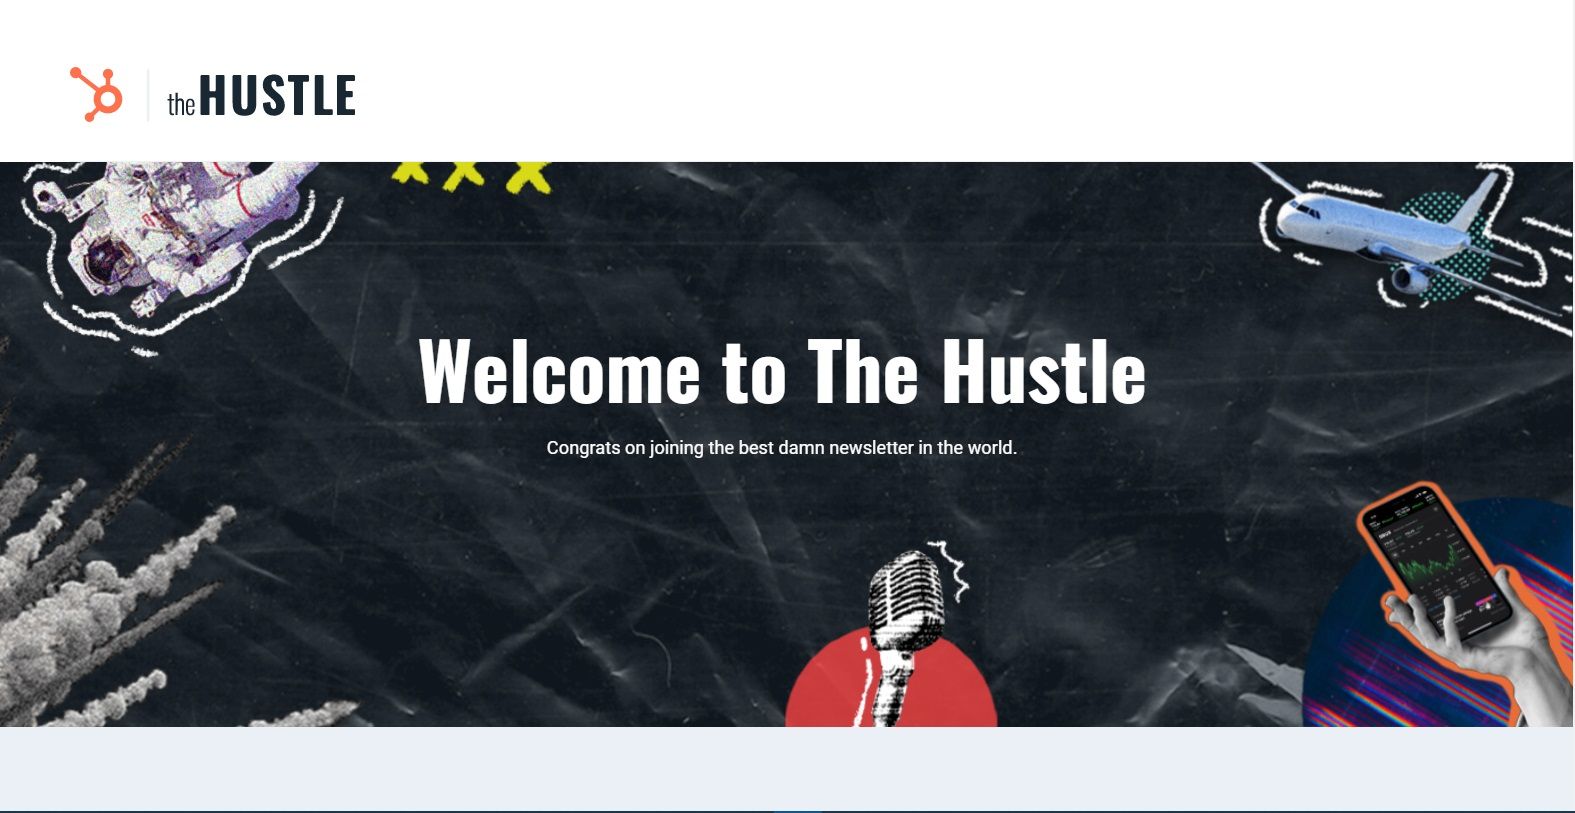 An image showing The Hustle newsletter